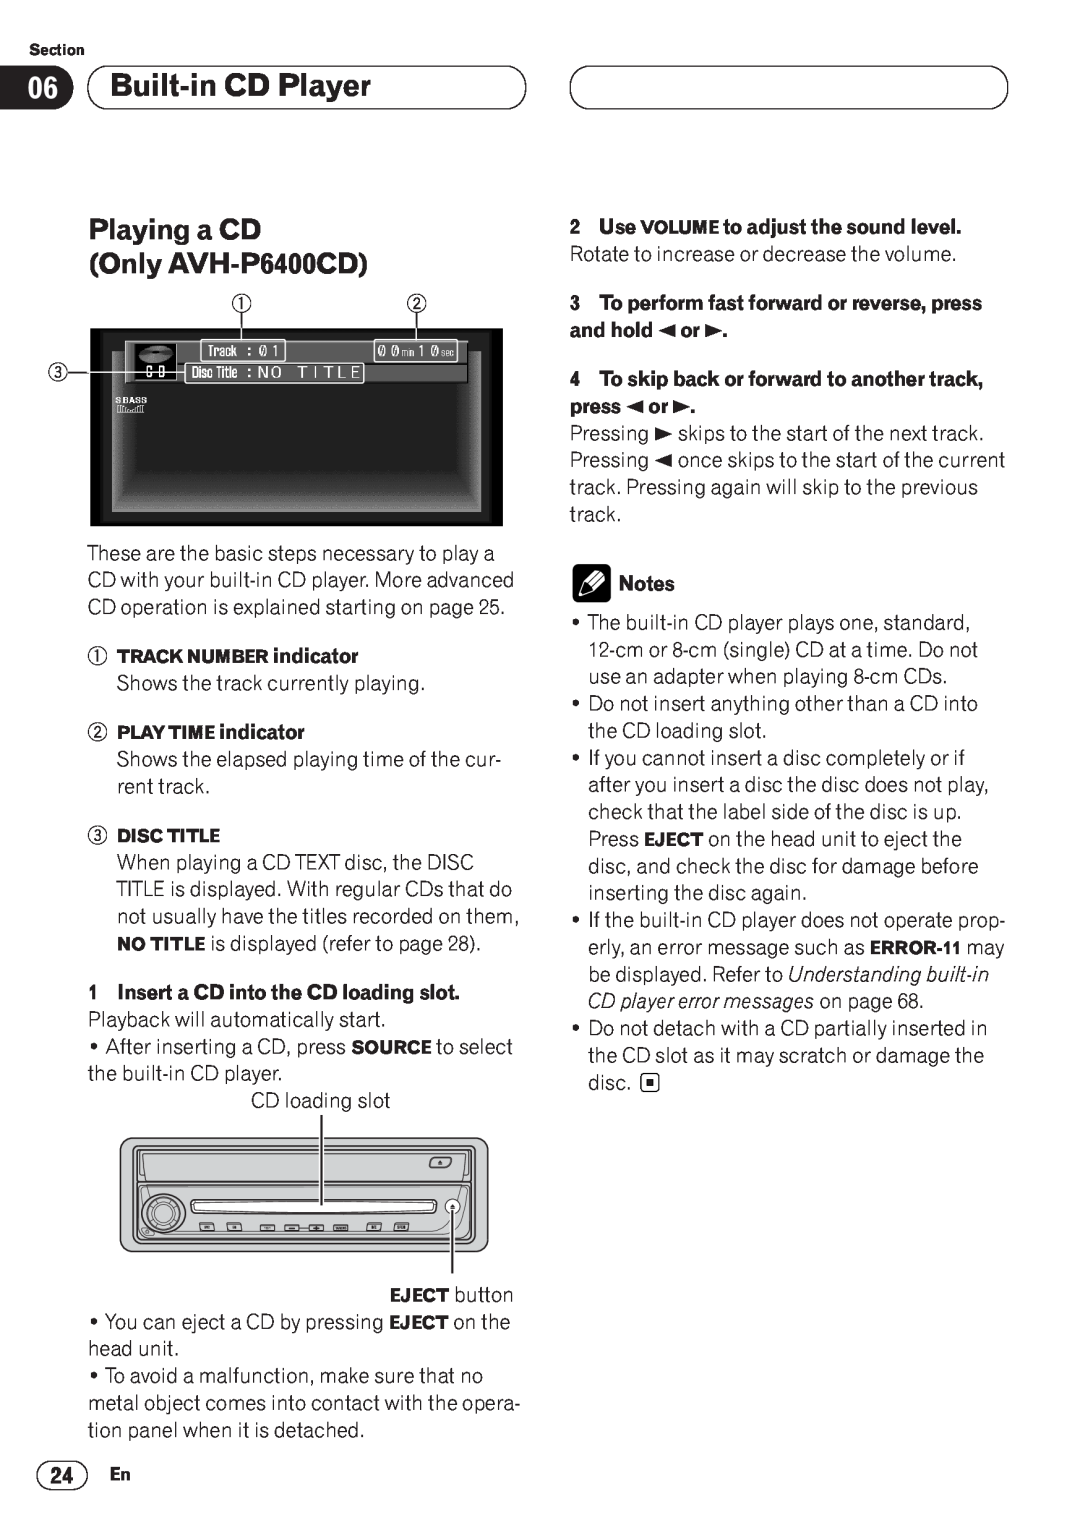 Pioneer Built-in CD Player, Playing a CD Only AVH-P6400CD, To perform fast forward or reverse, press and hold 2or 